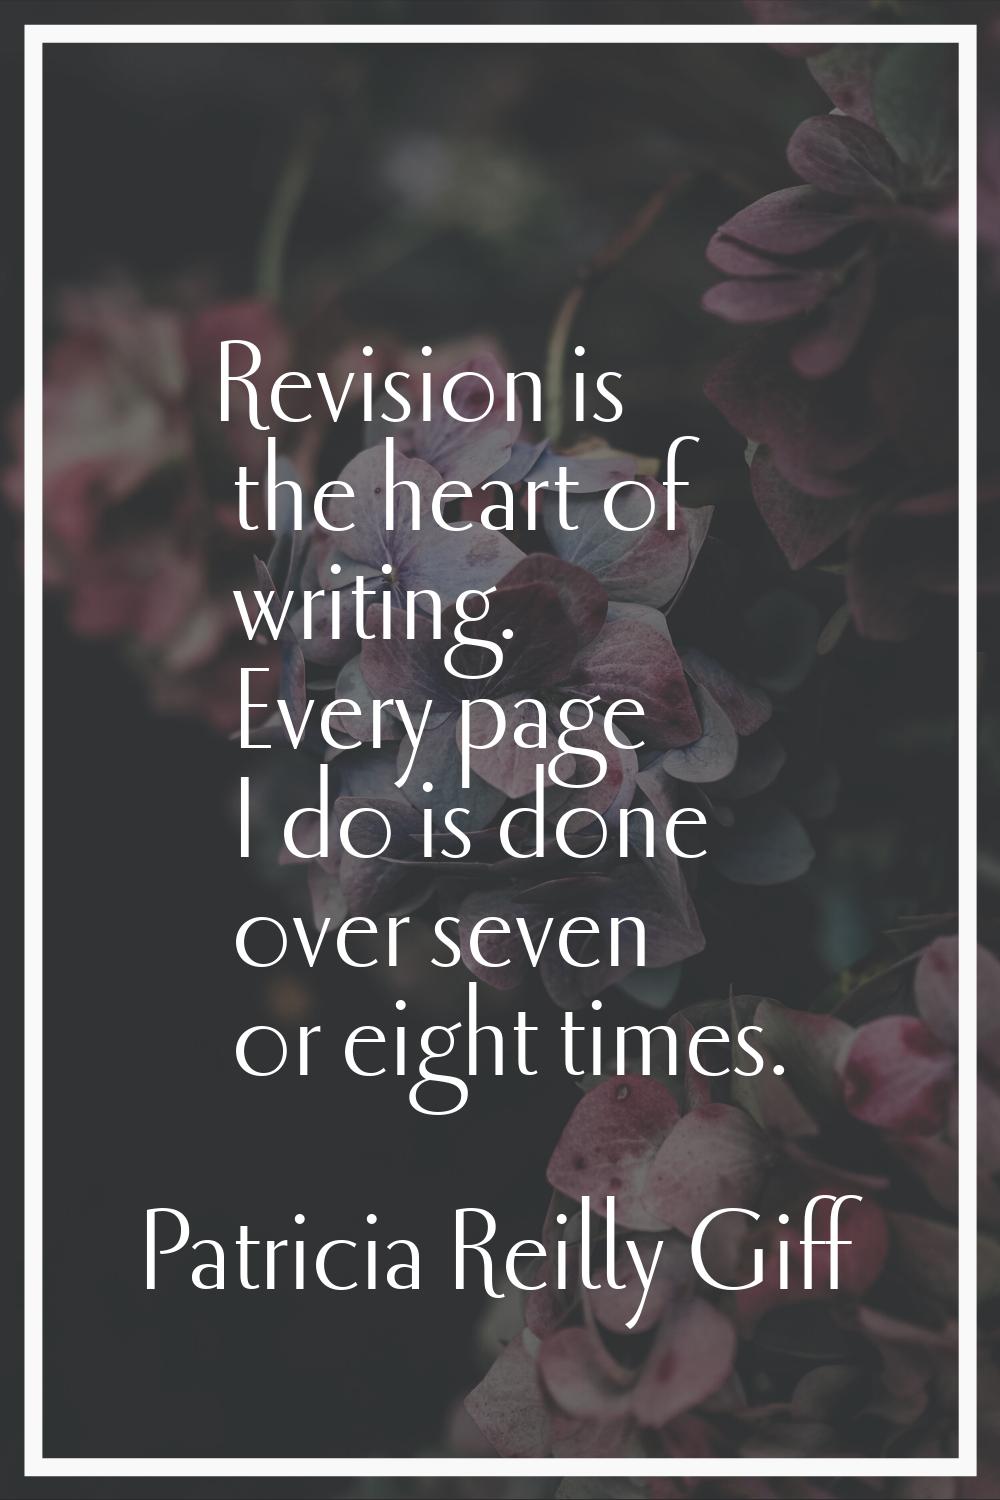 Revision is the heart of writing. Every page I do is done over seven or eight times.